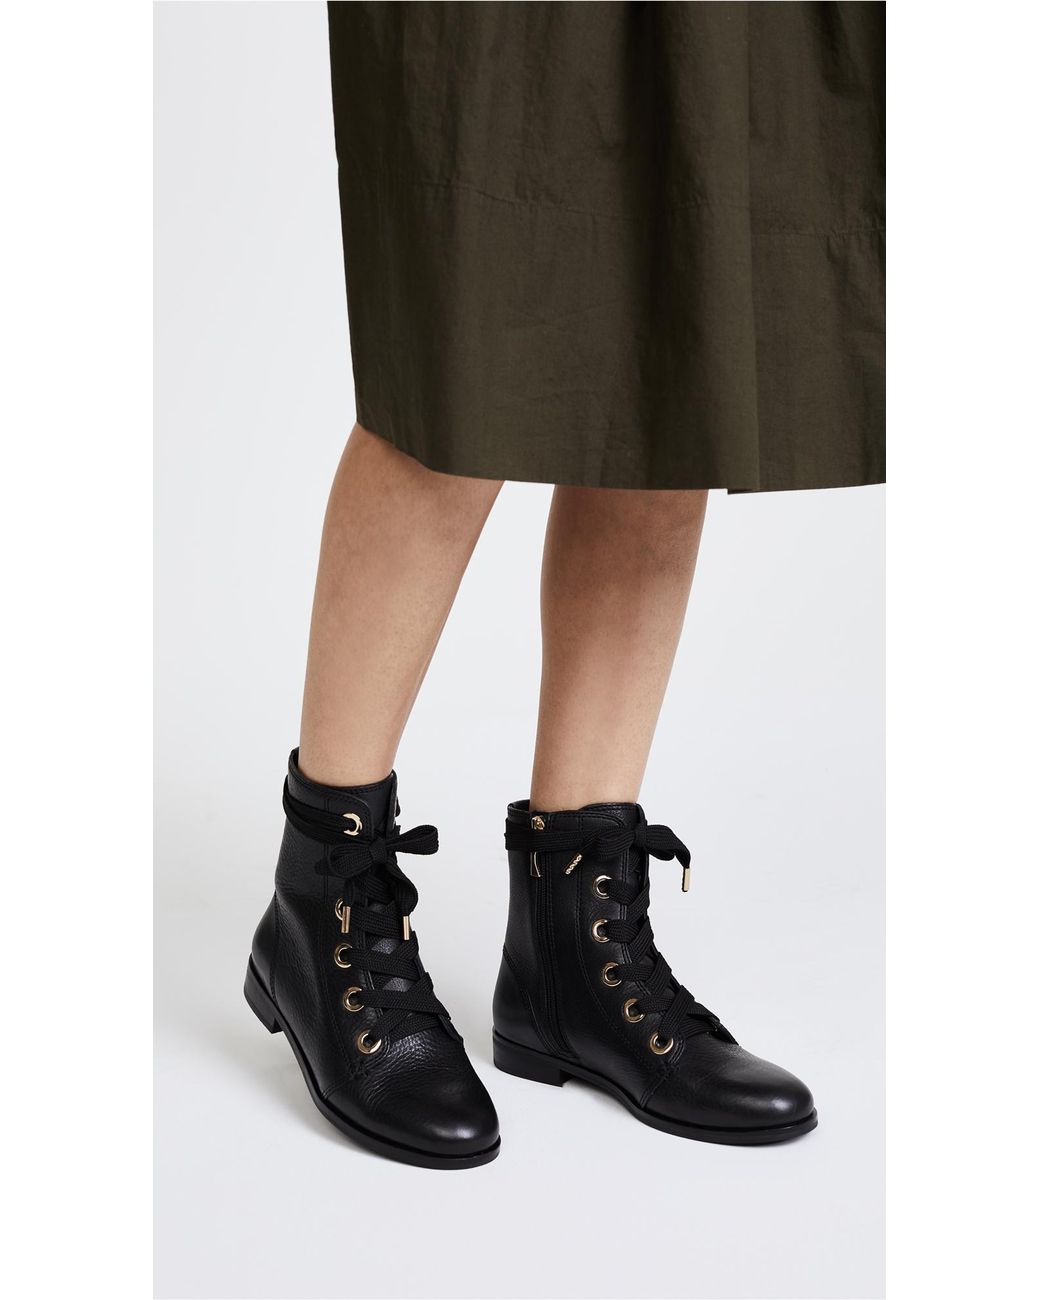 Kate Spade Raquel Lace Up Combat Boots in Black | Lyst